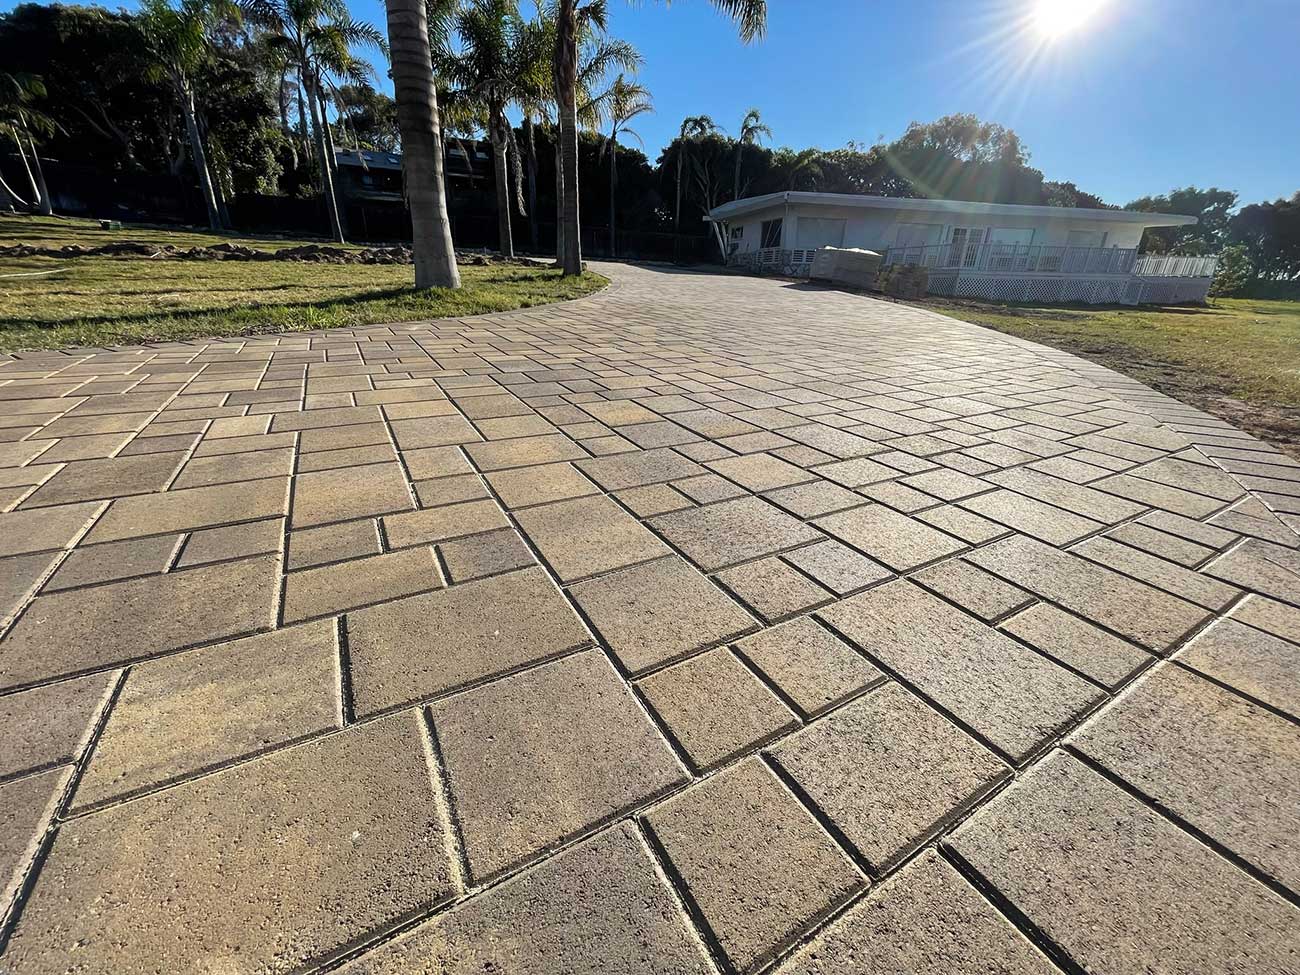 Angelus Courtyard paver driveway in Sand Stone Mocha color